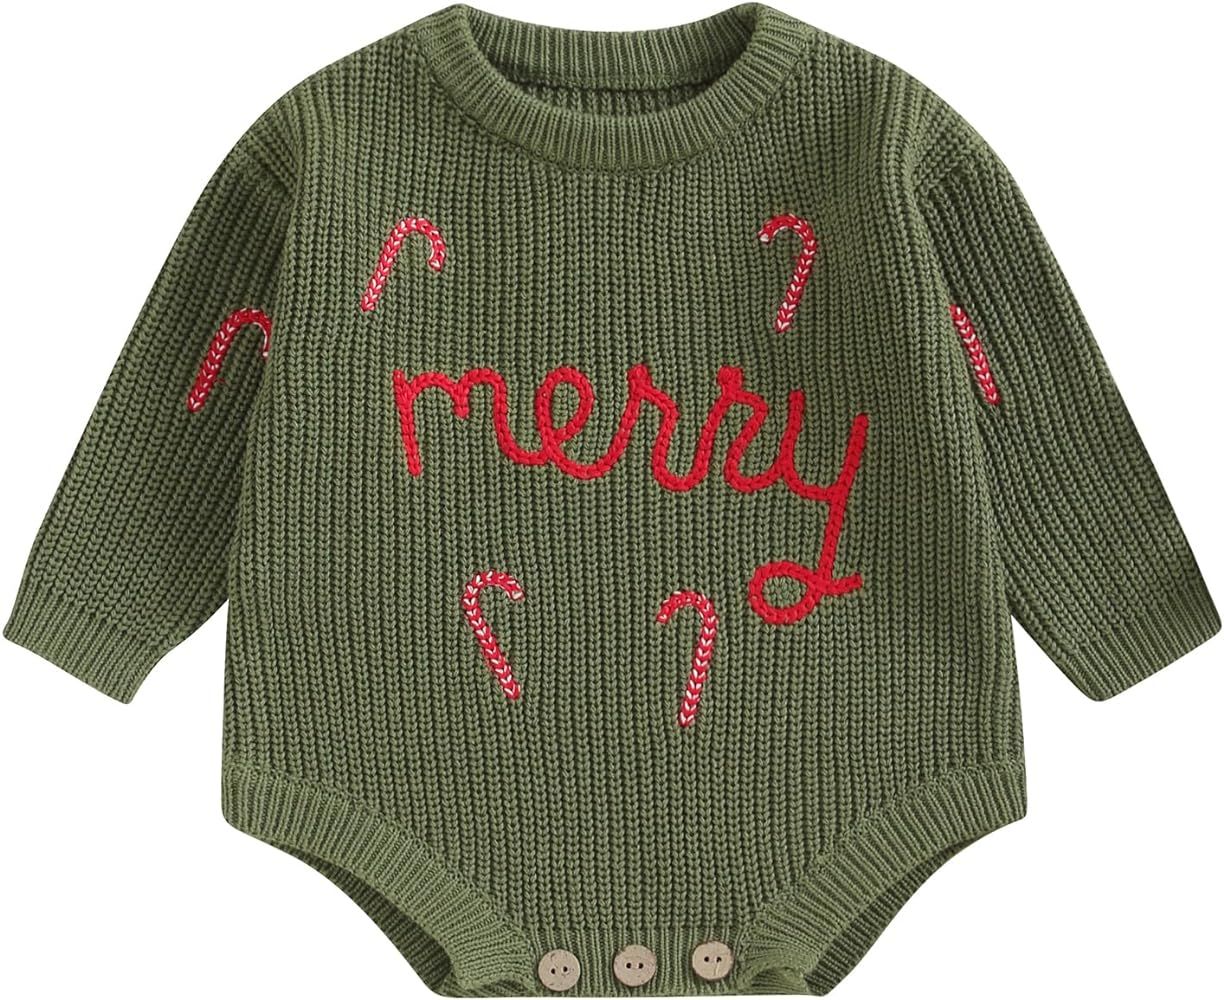 Bonangber Toddler Baby Boy Girl Christmas Sweater Merry Candy Cane Embroidery Knit Warm Pullover Sweatshirt Fall Clothes | Amazon (US)